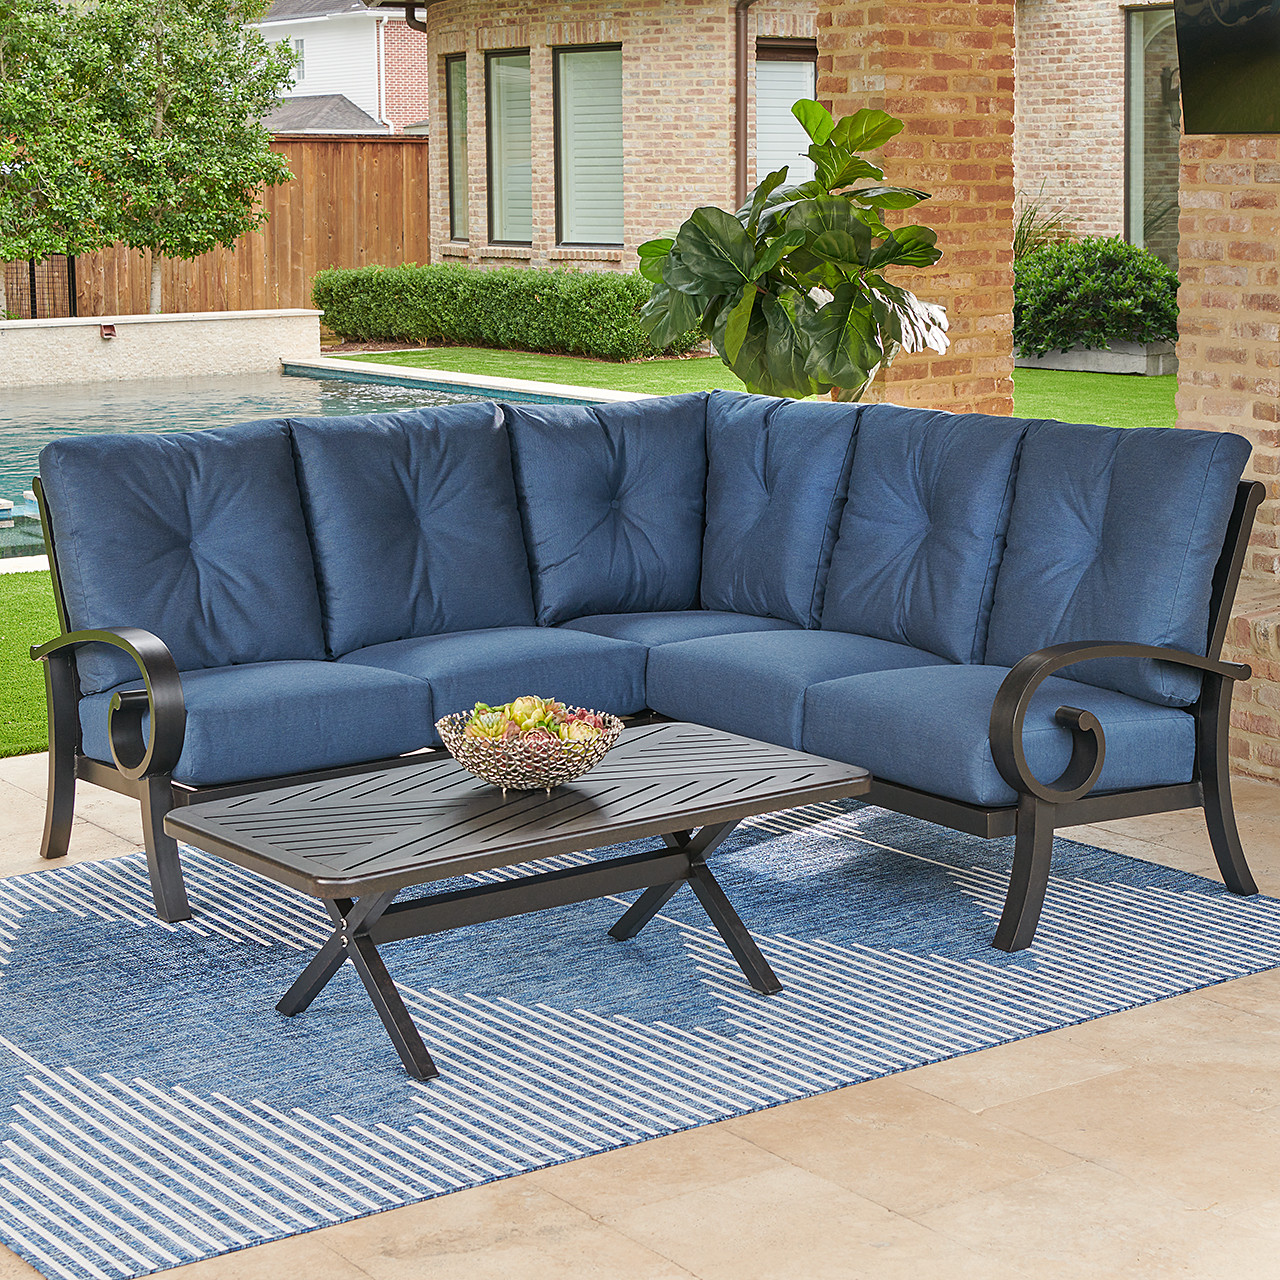 Solstice 4pc. Outdoor Sectional with Navy Cushions